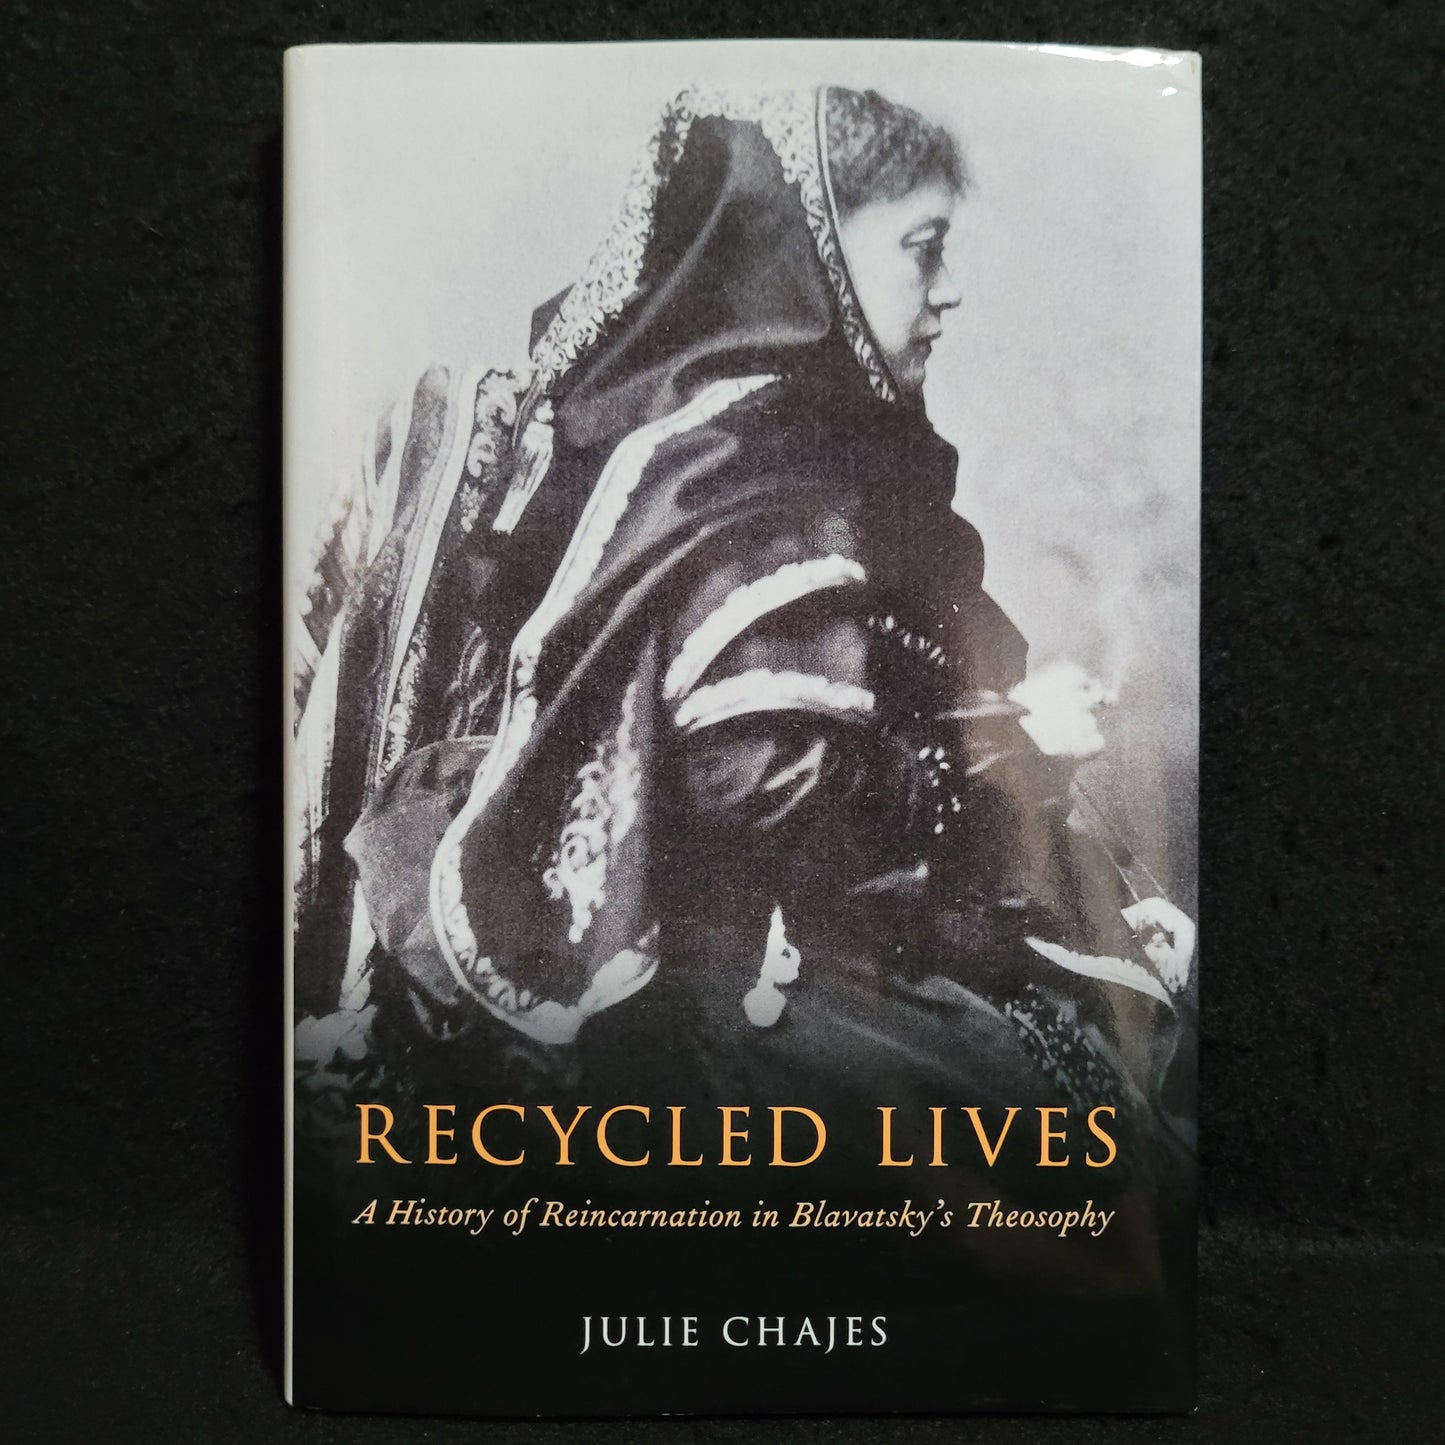 Recycled Lives: A History of Reincarnation in Blavatsky's Theosophy by Julie Chajes (Oxford University Press, 2019) Hardcover